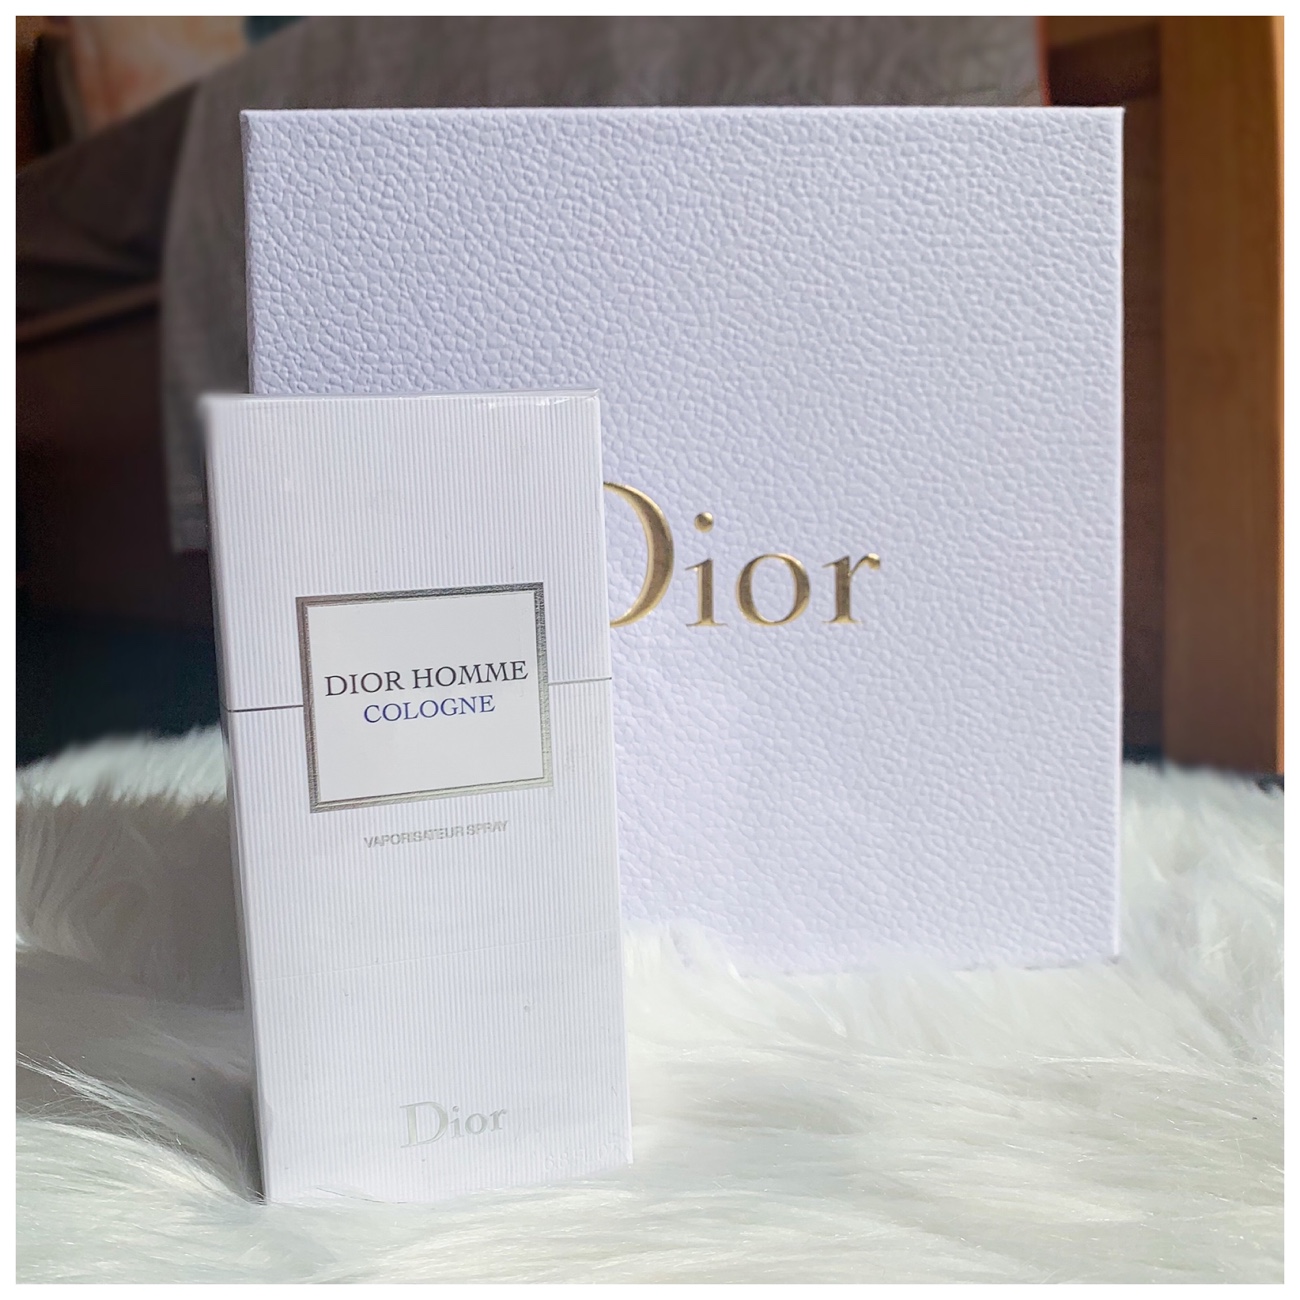 I won a Dior gift basket from Farmers worth over $1000!